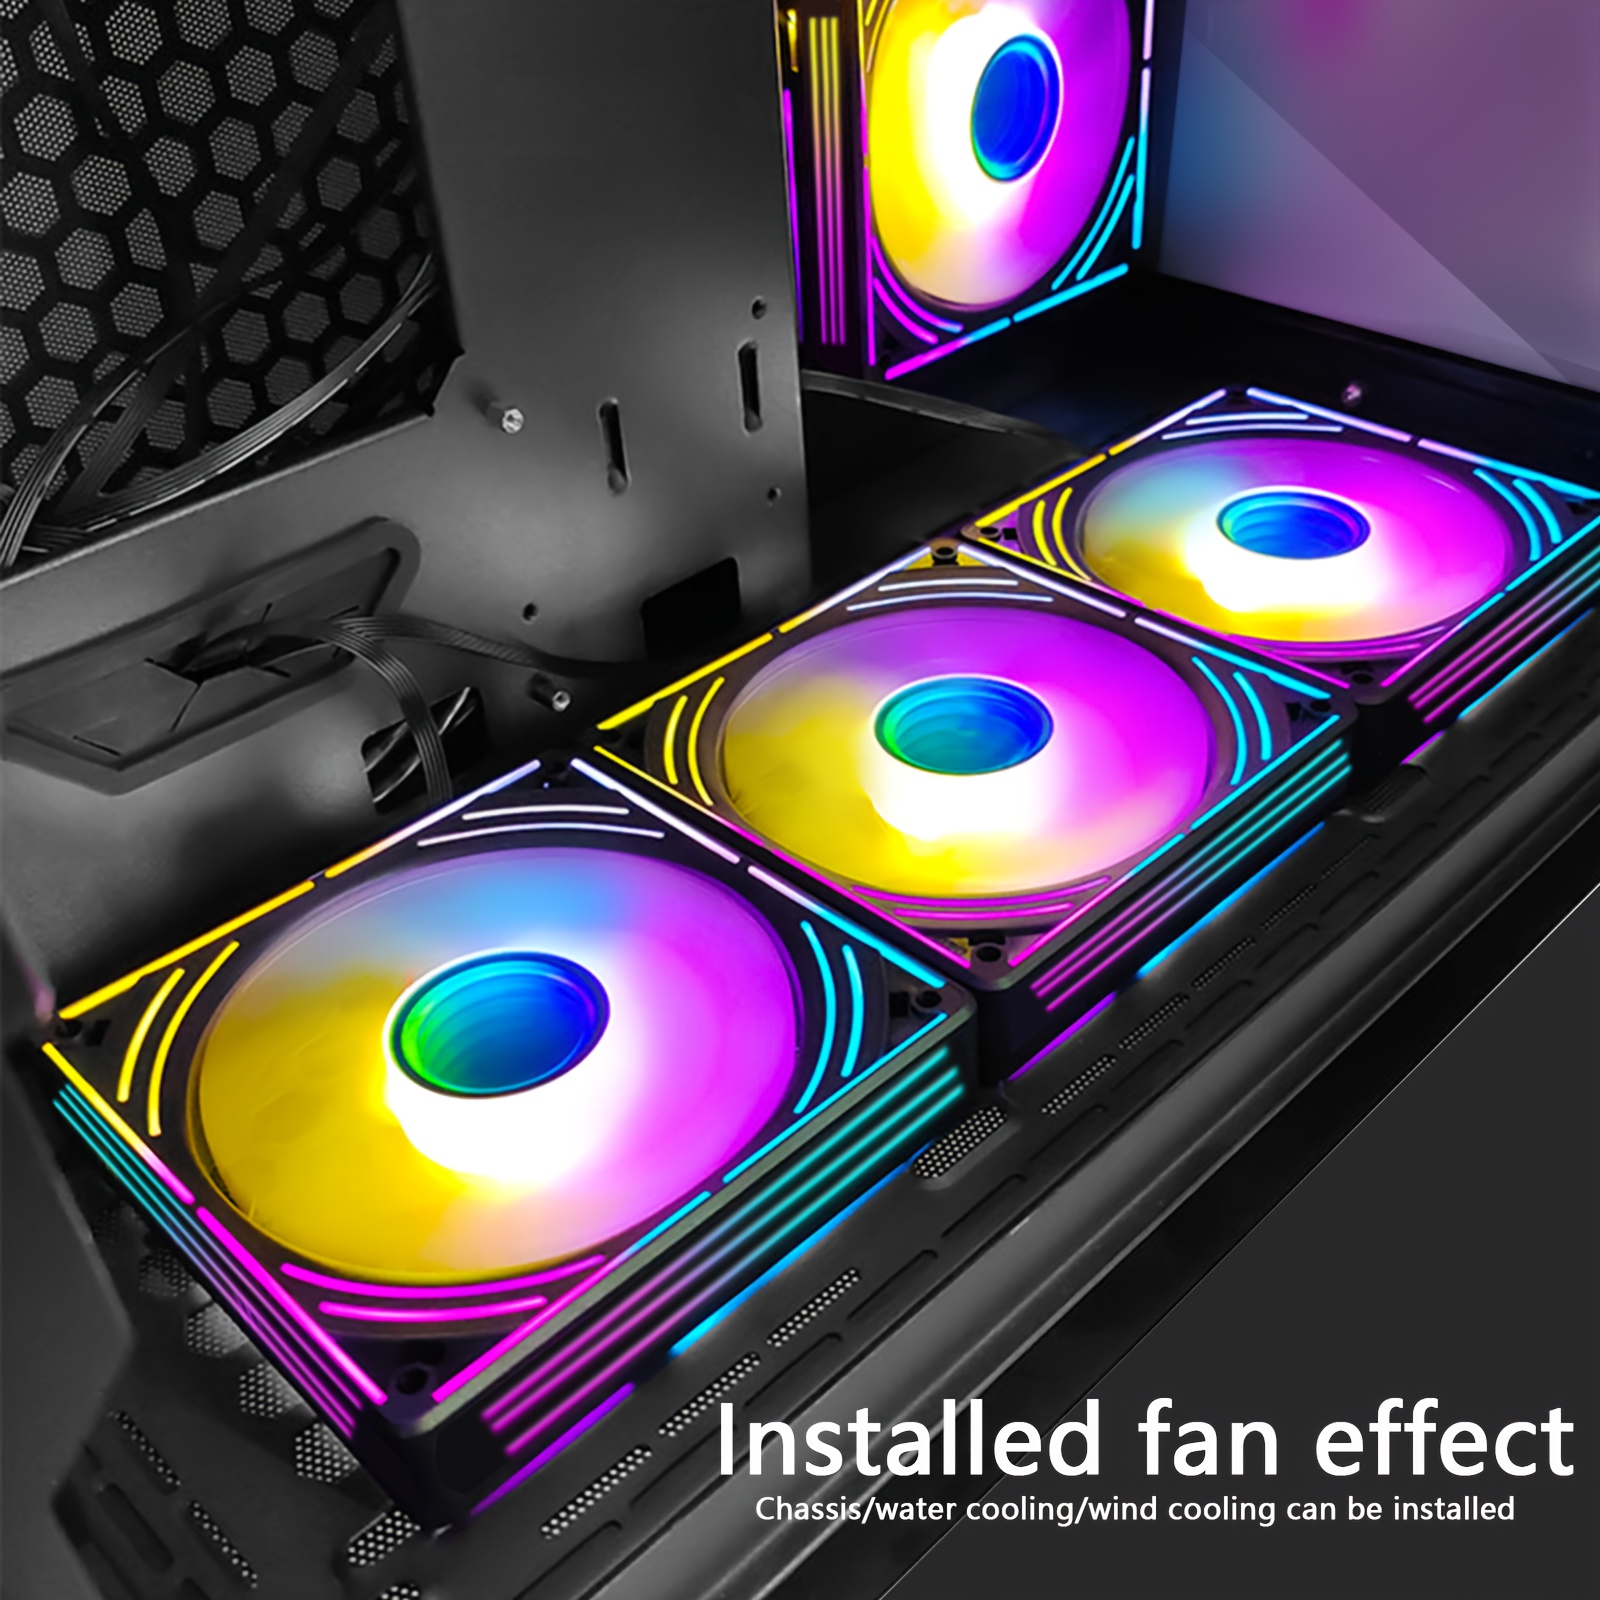 The RGB Radiator Fan For The Host Computer Case Is 4.72inch In Size,  Equipped With LED Lights, Operates Quietly, And Has Temperature Control.